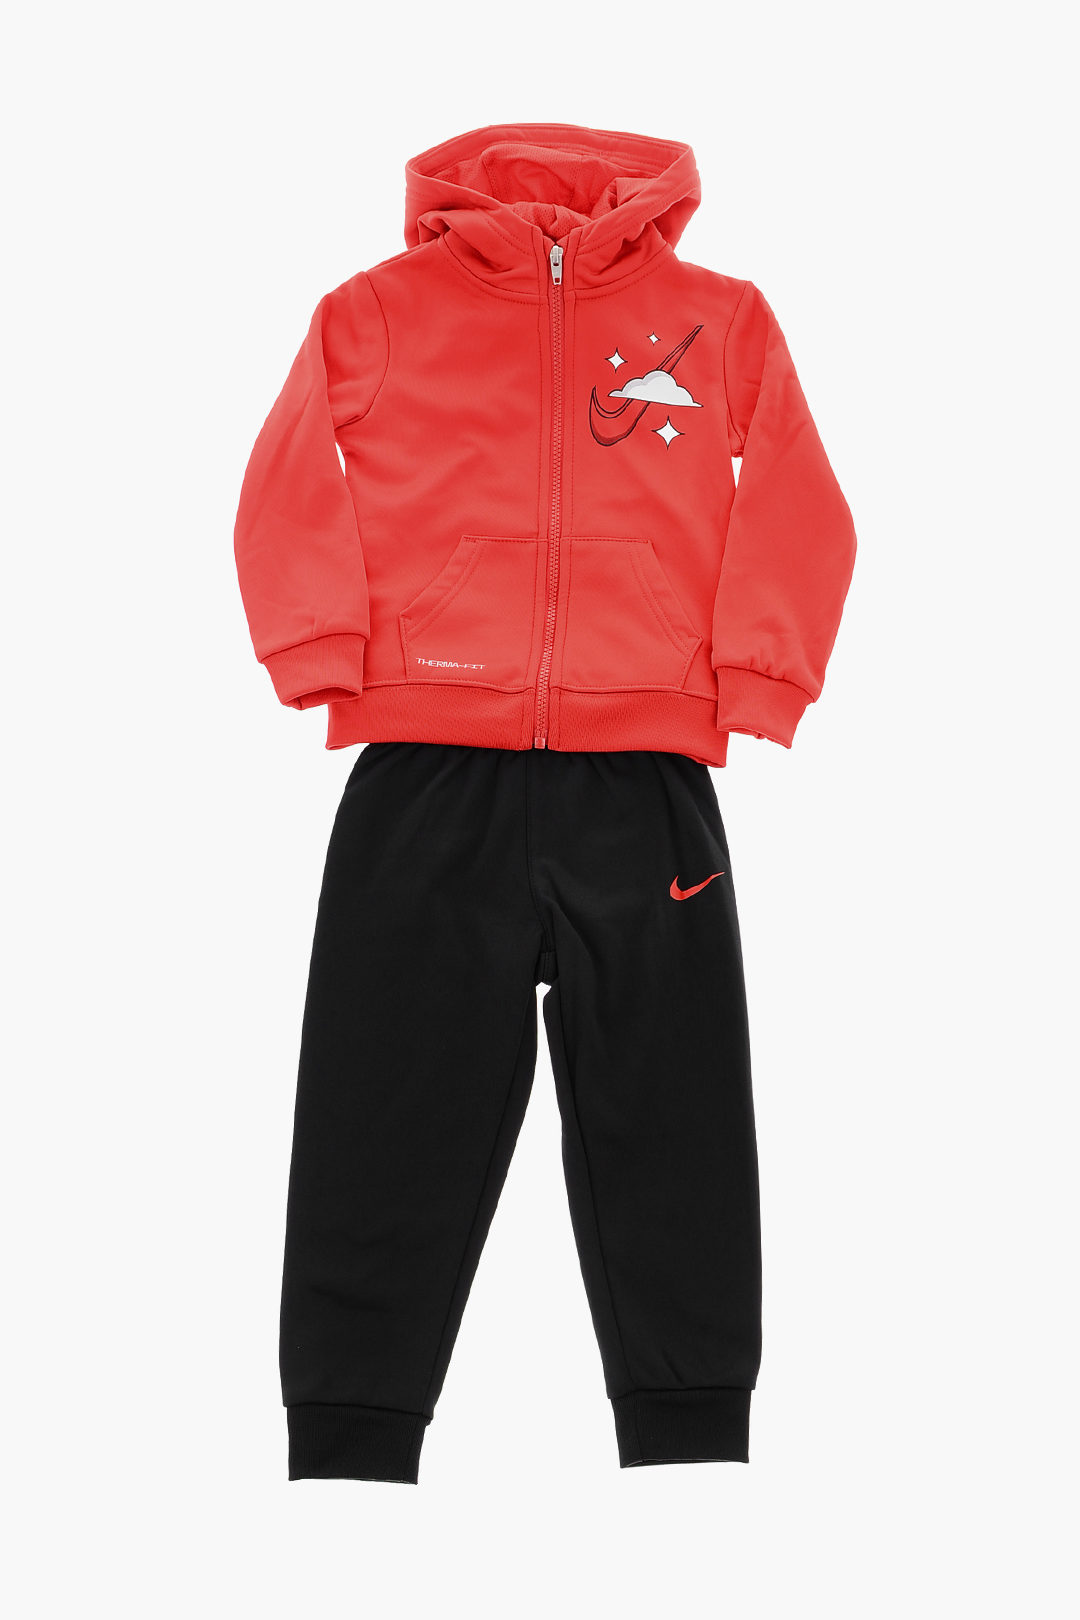 https://data.glamood.com/imgprodotto/thermafit-hoodie-and-joggers-all-day-play-set_1261156_zoom.jpg